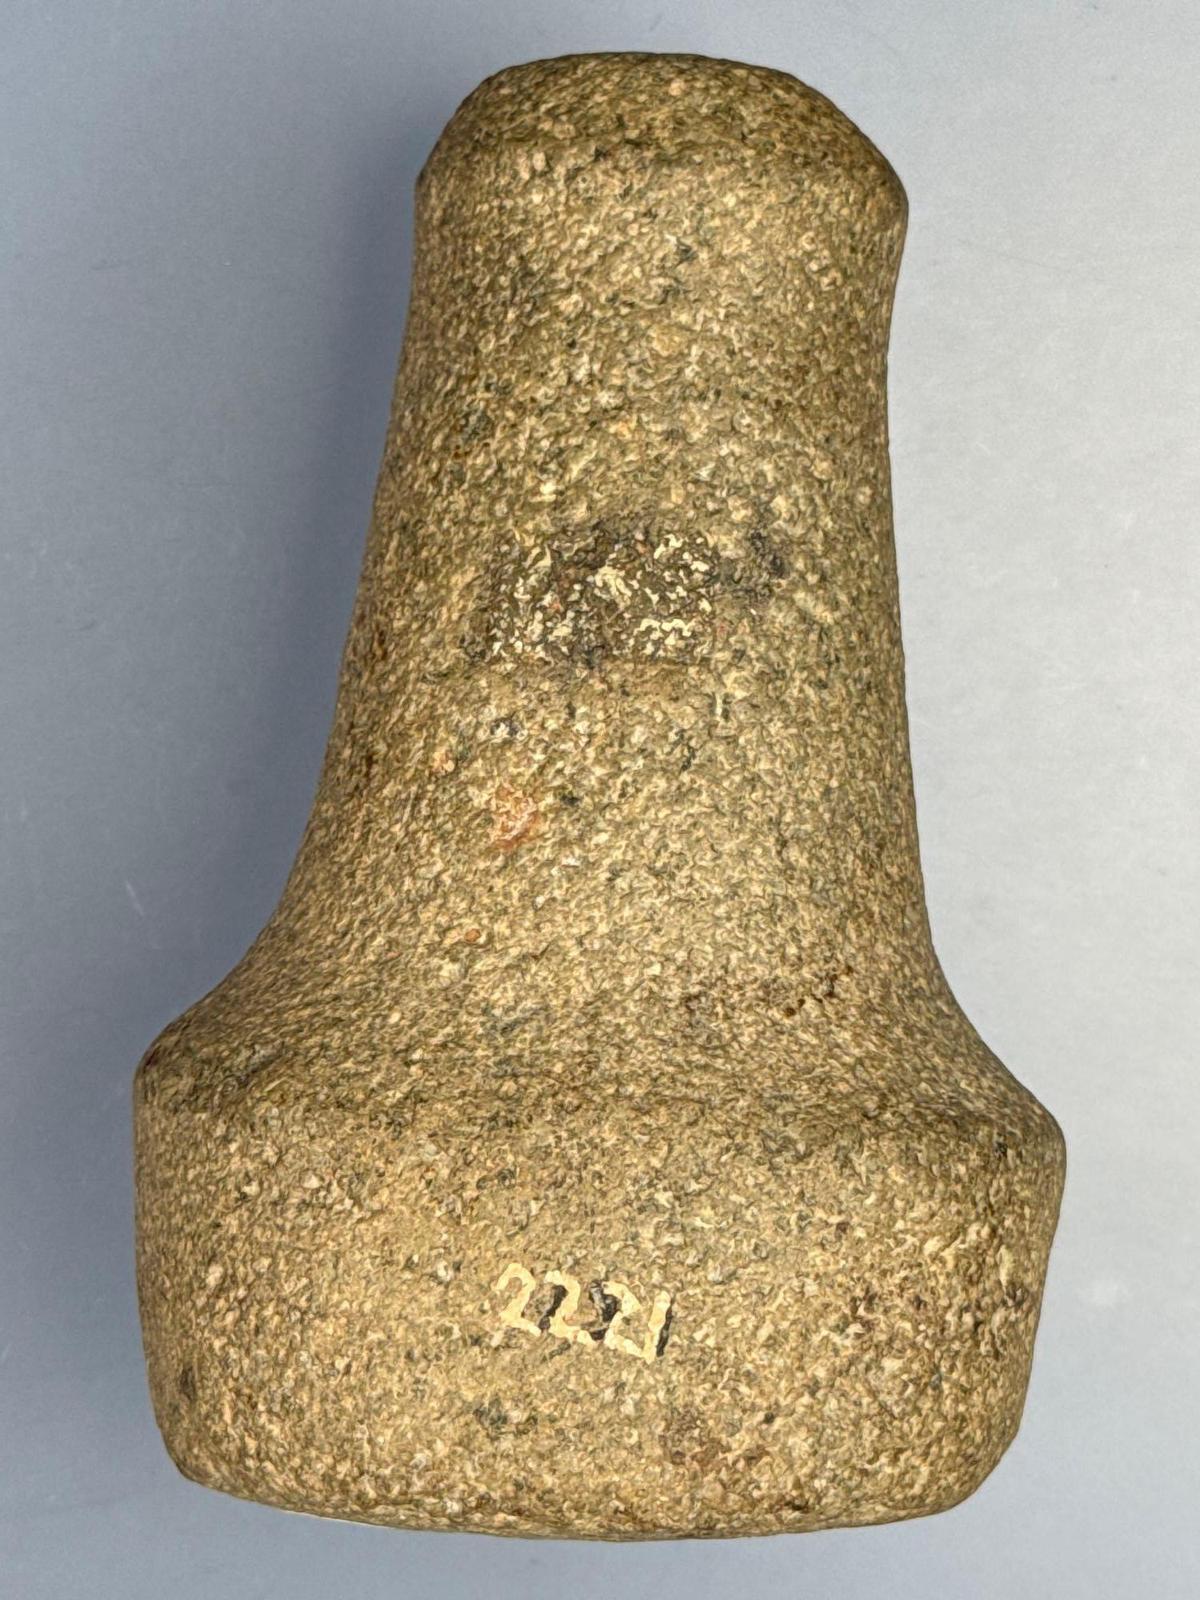 IMPRESSIVE 6" Highly Stylized Pestle, Found in Ohio, Purchased by Walt in 1998